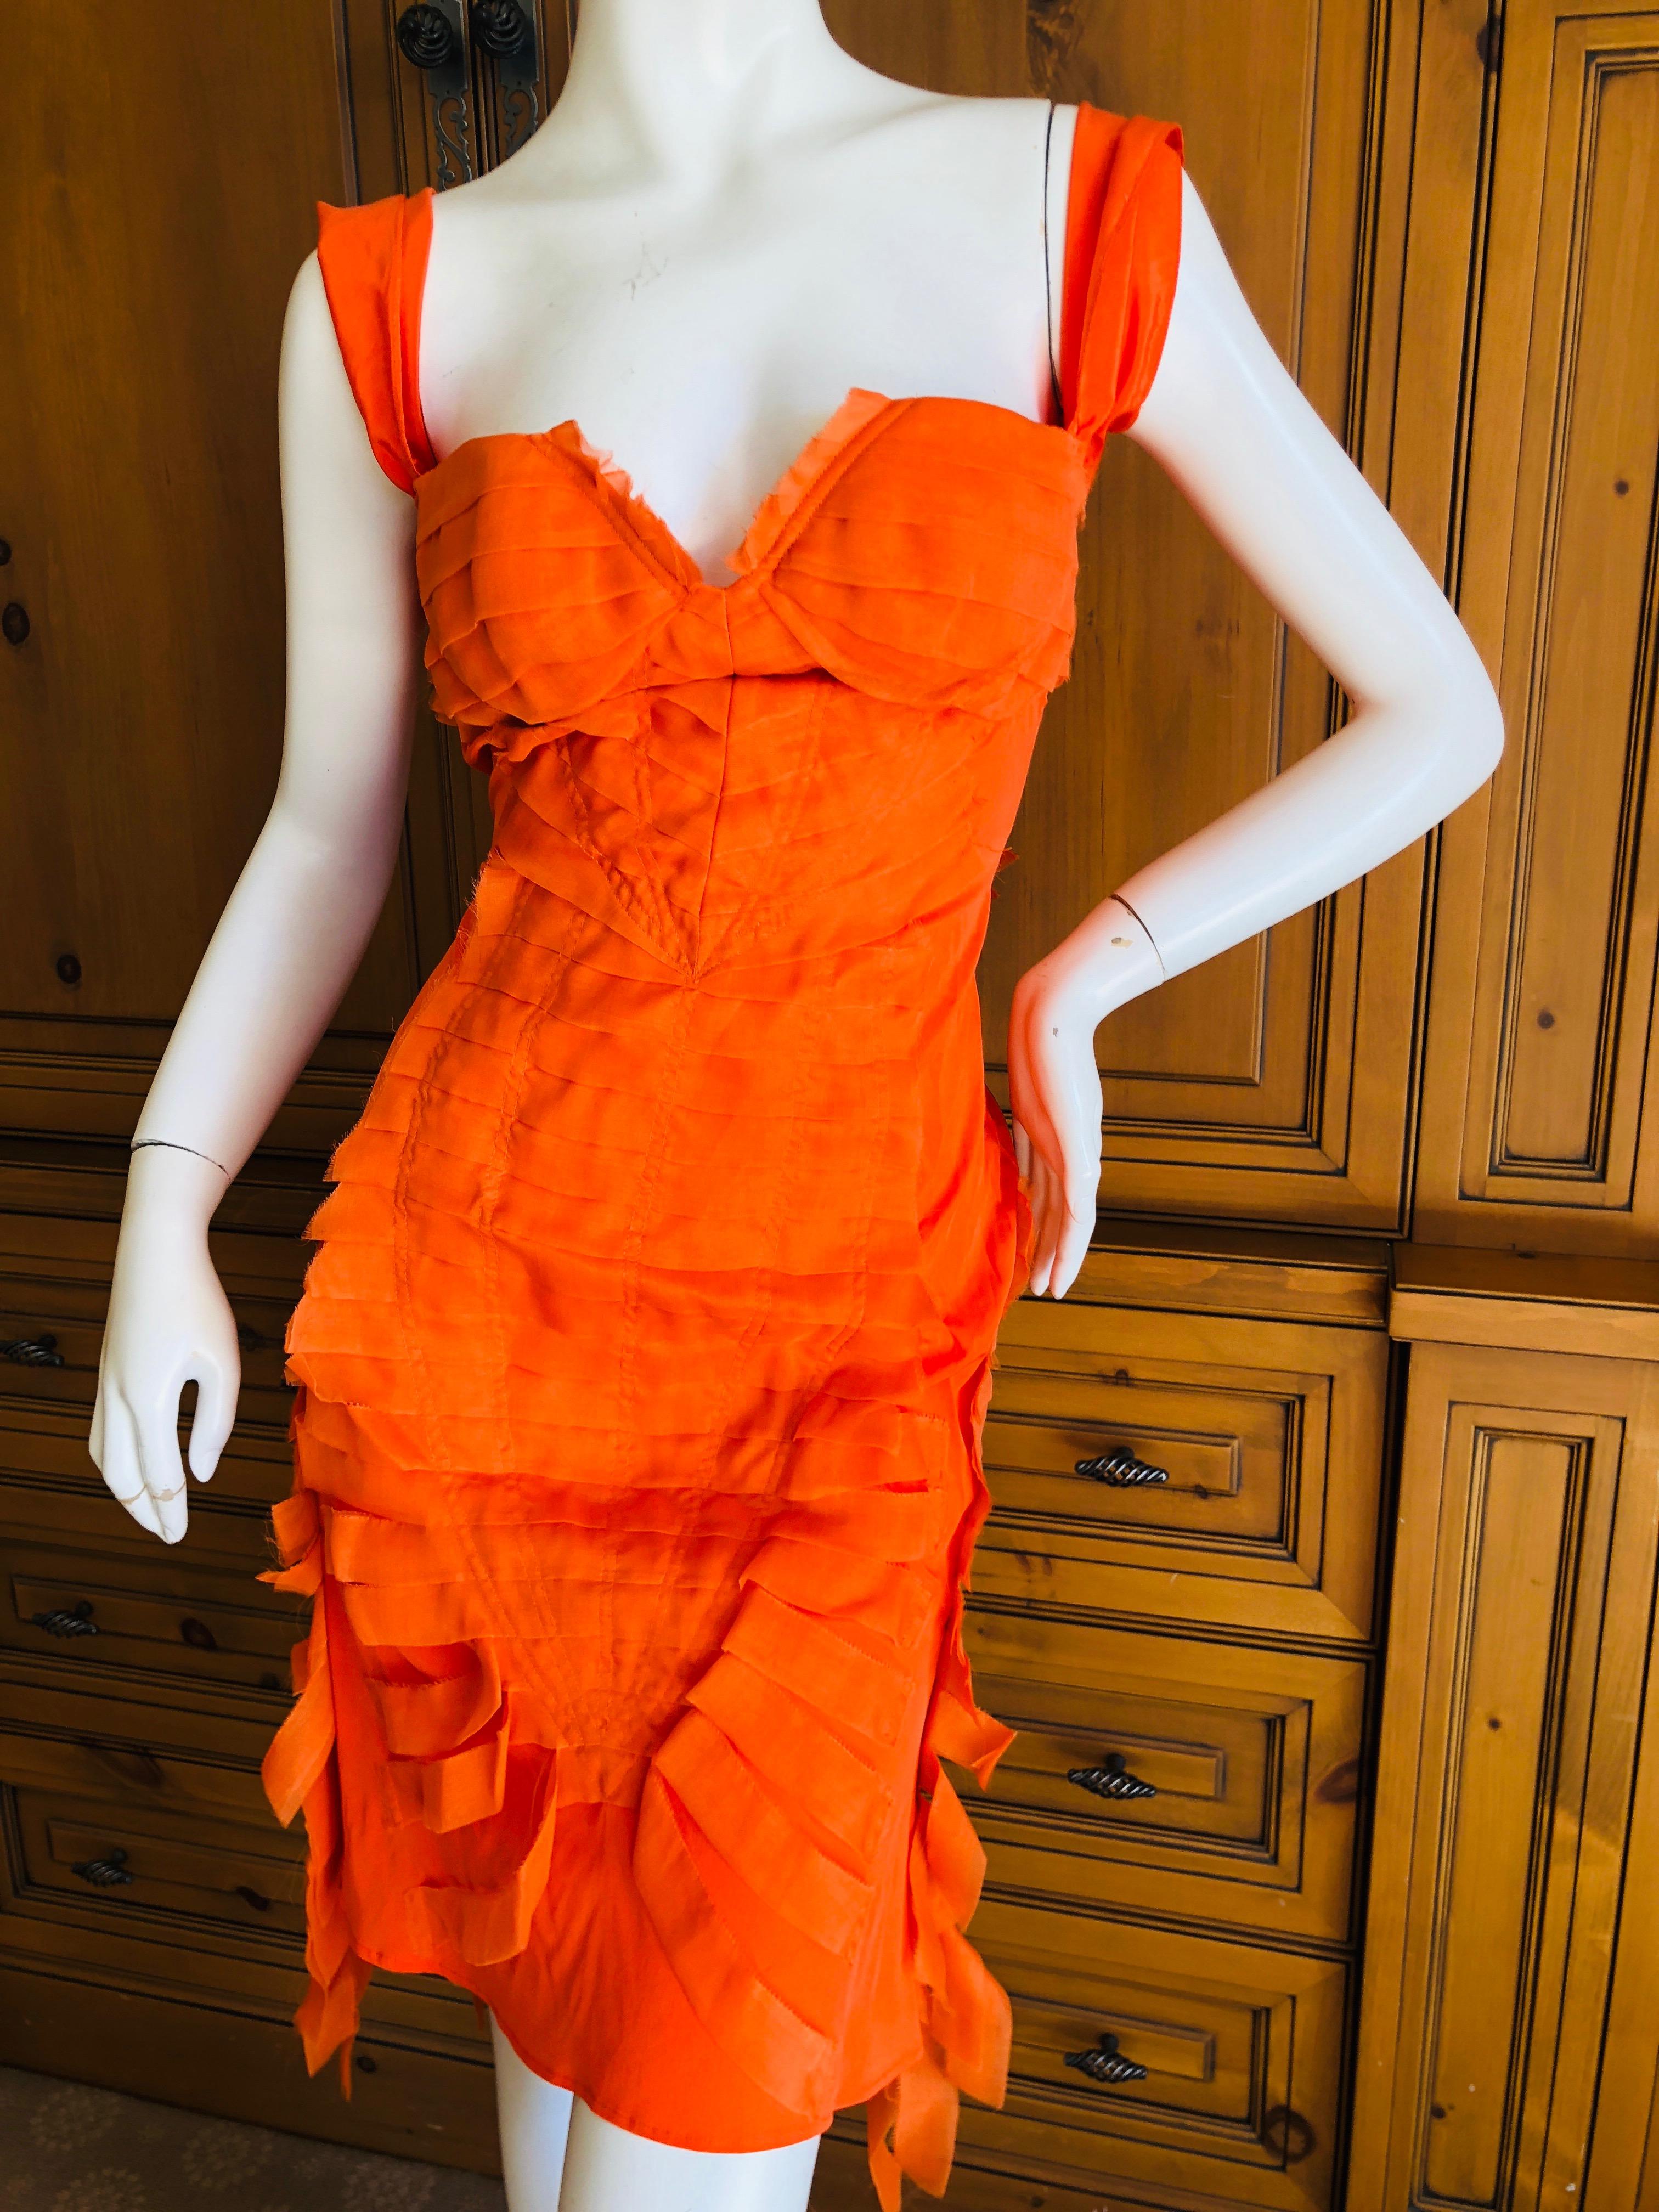 Gucci by Tom Ford 2004 Orange Ribbon Dress Tom Ford Book Piece  For Sale 3